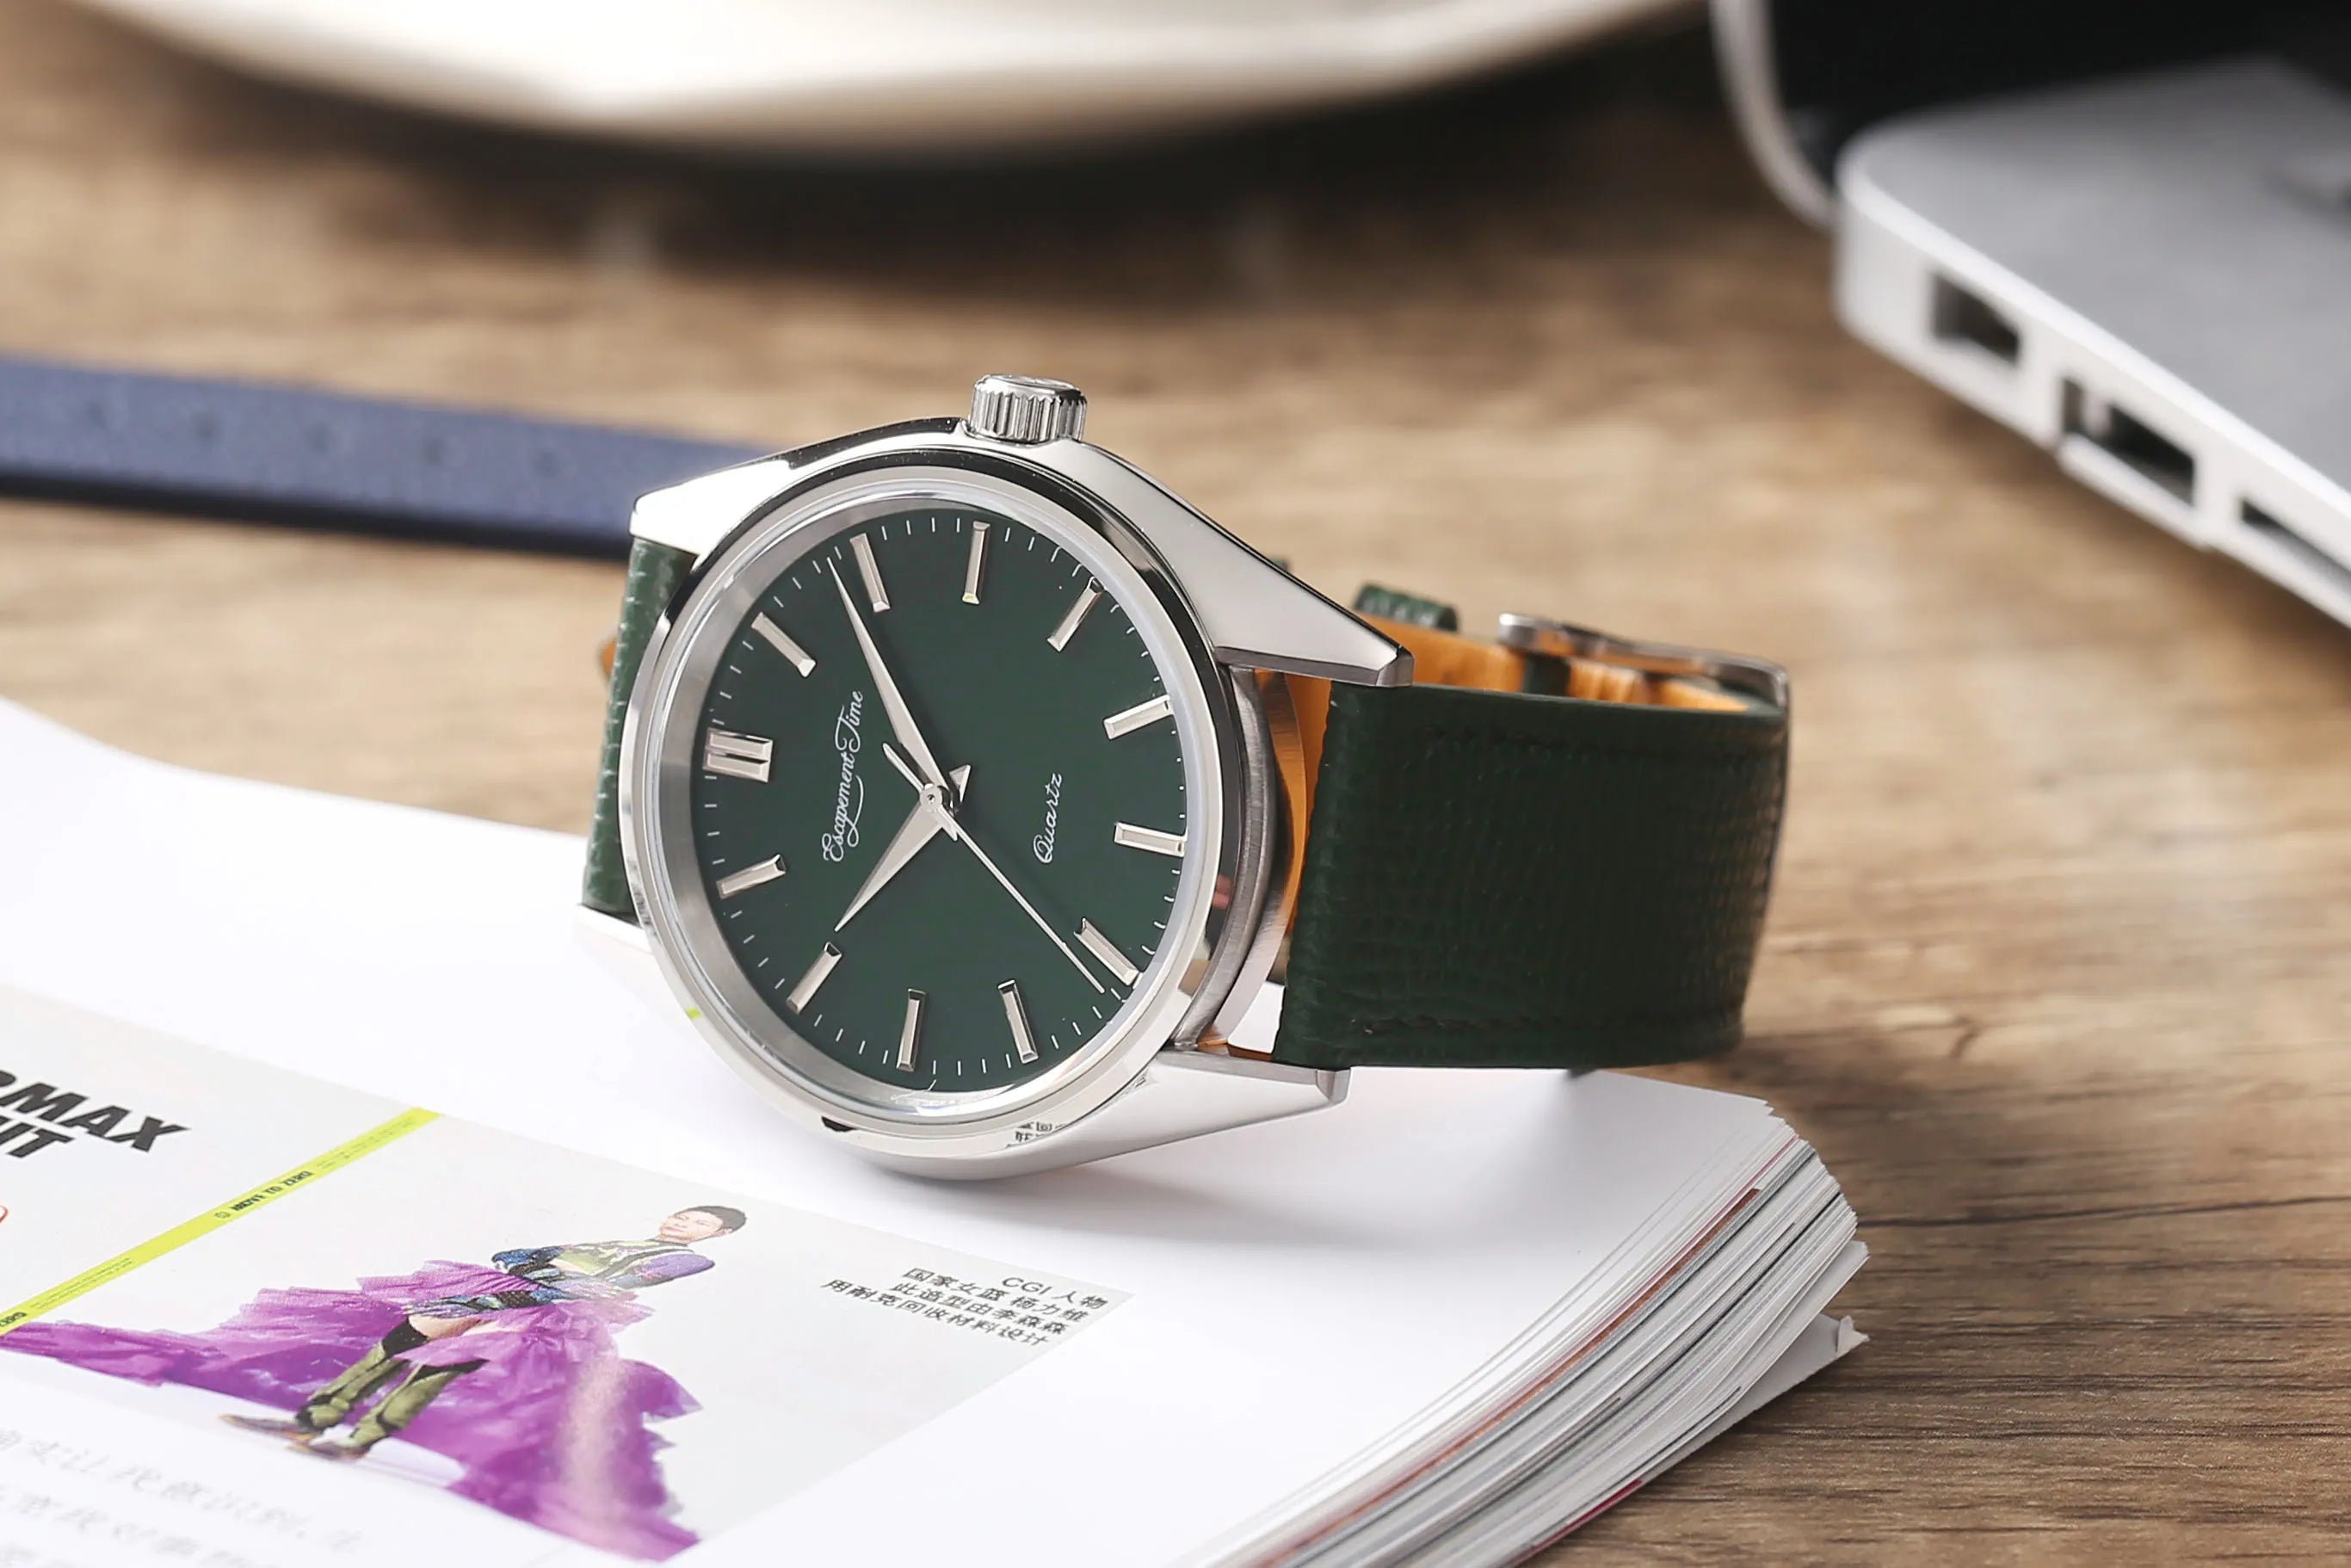 The Formal Leather Watch green face and green